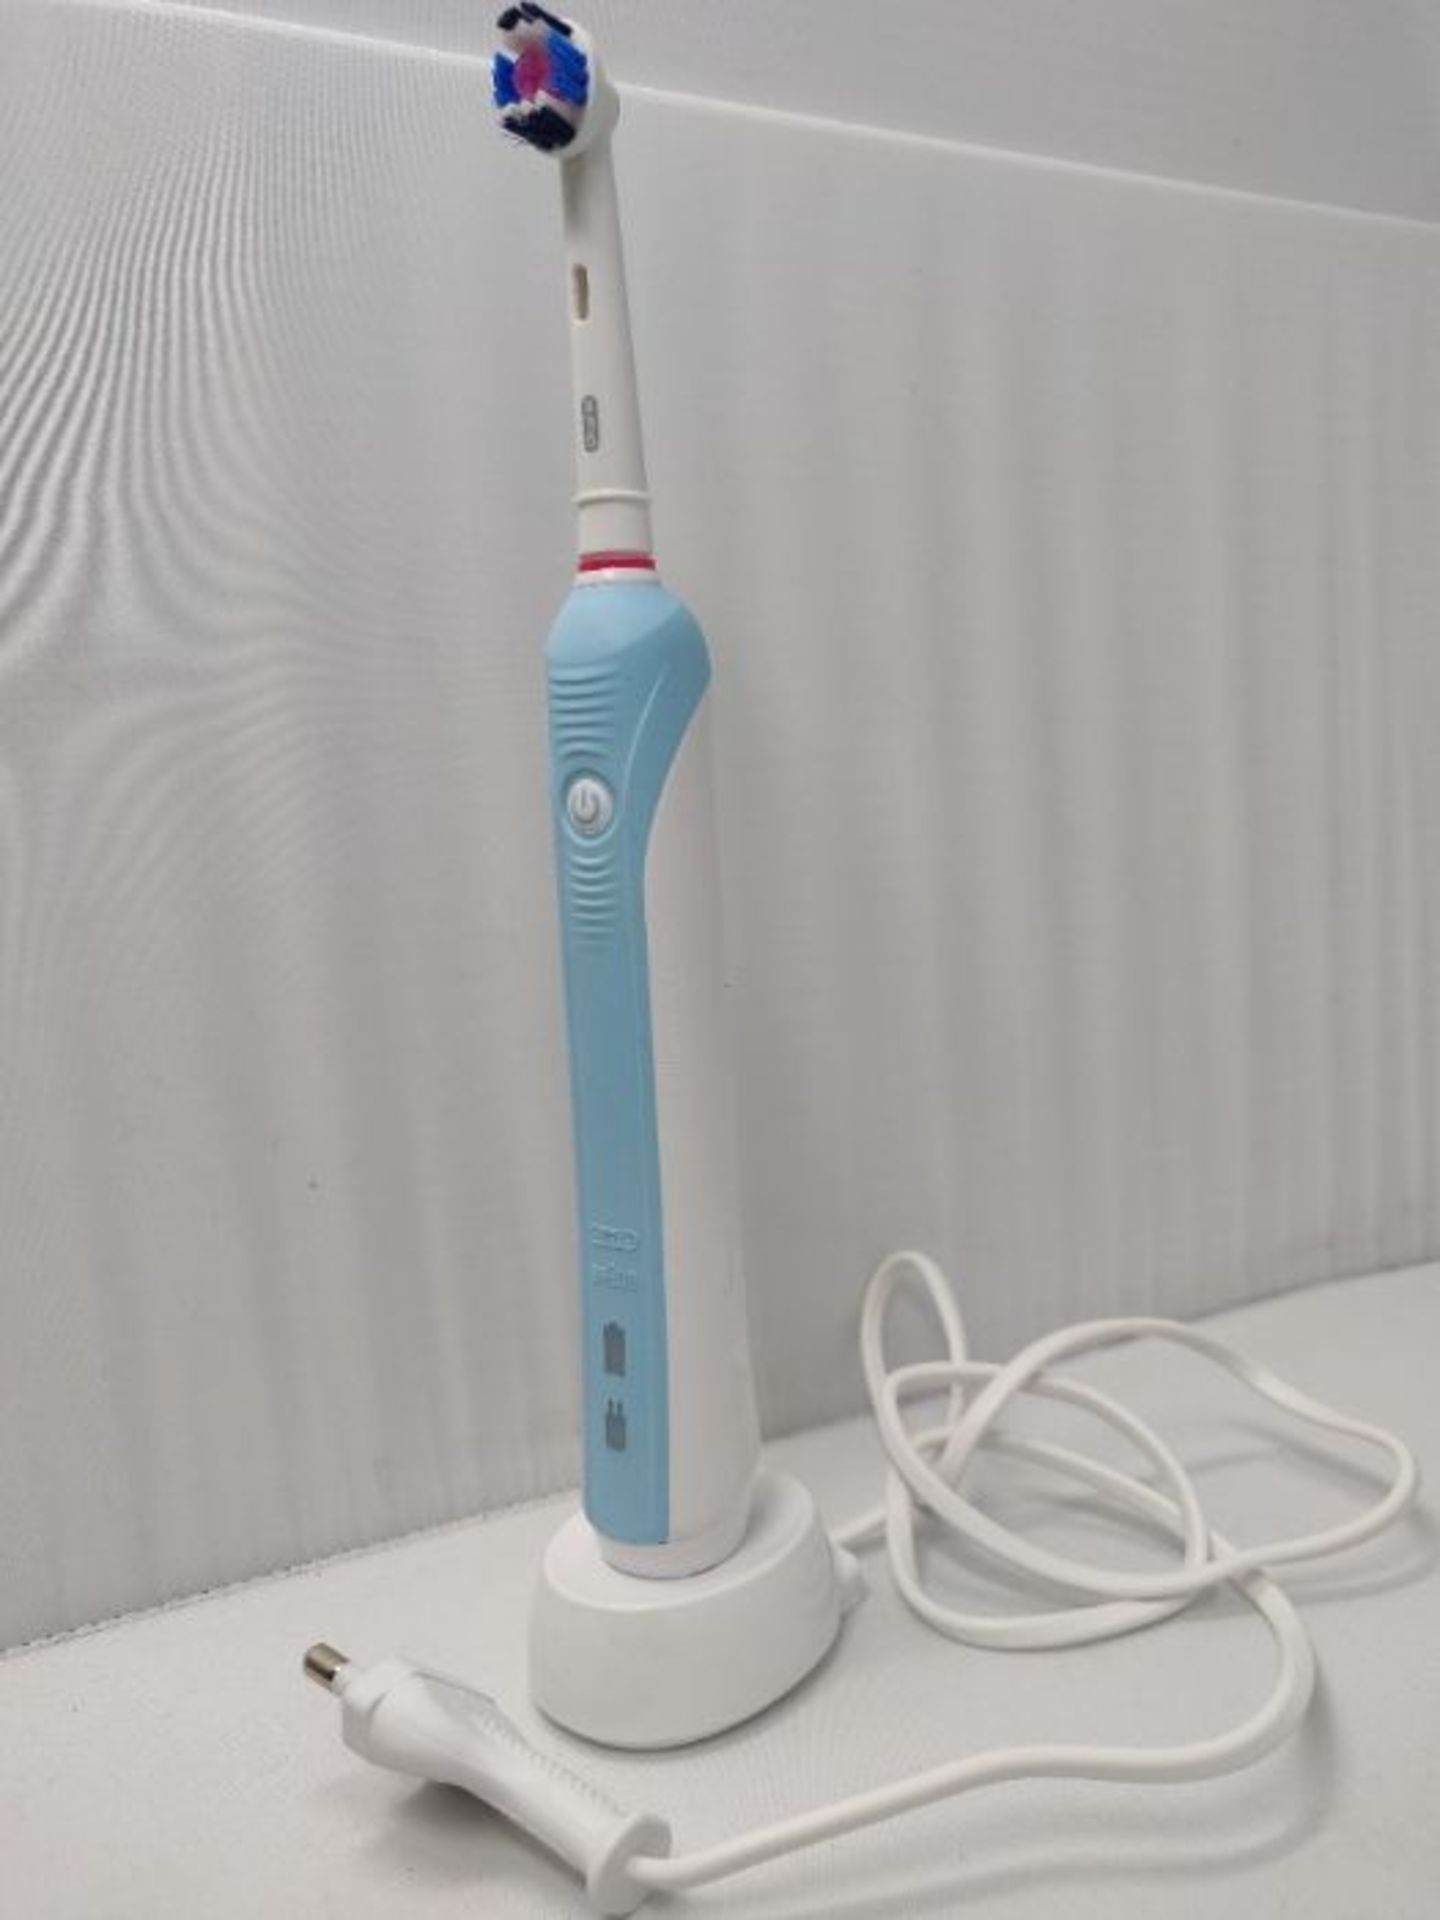 Oral-B Pro 600 3D White Electric Rechargeable Toothbrush Powered by Braun, 1 Handle, 1 - Image 2 of 2